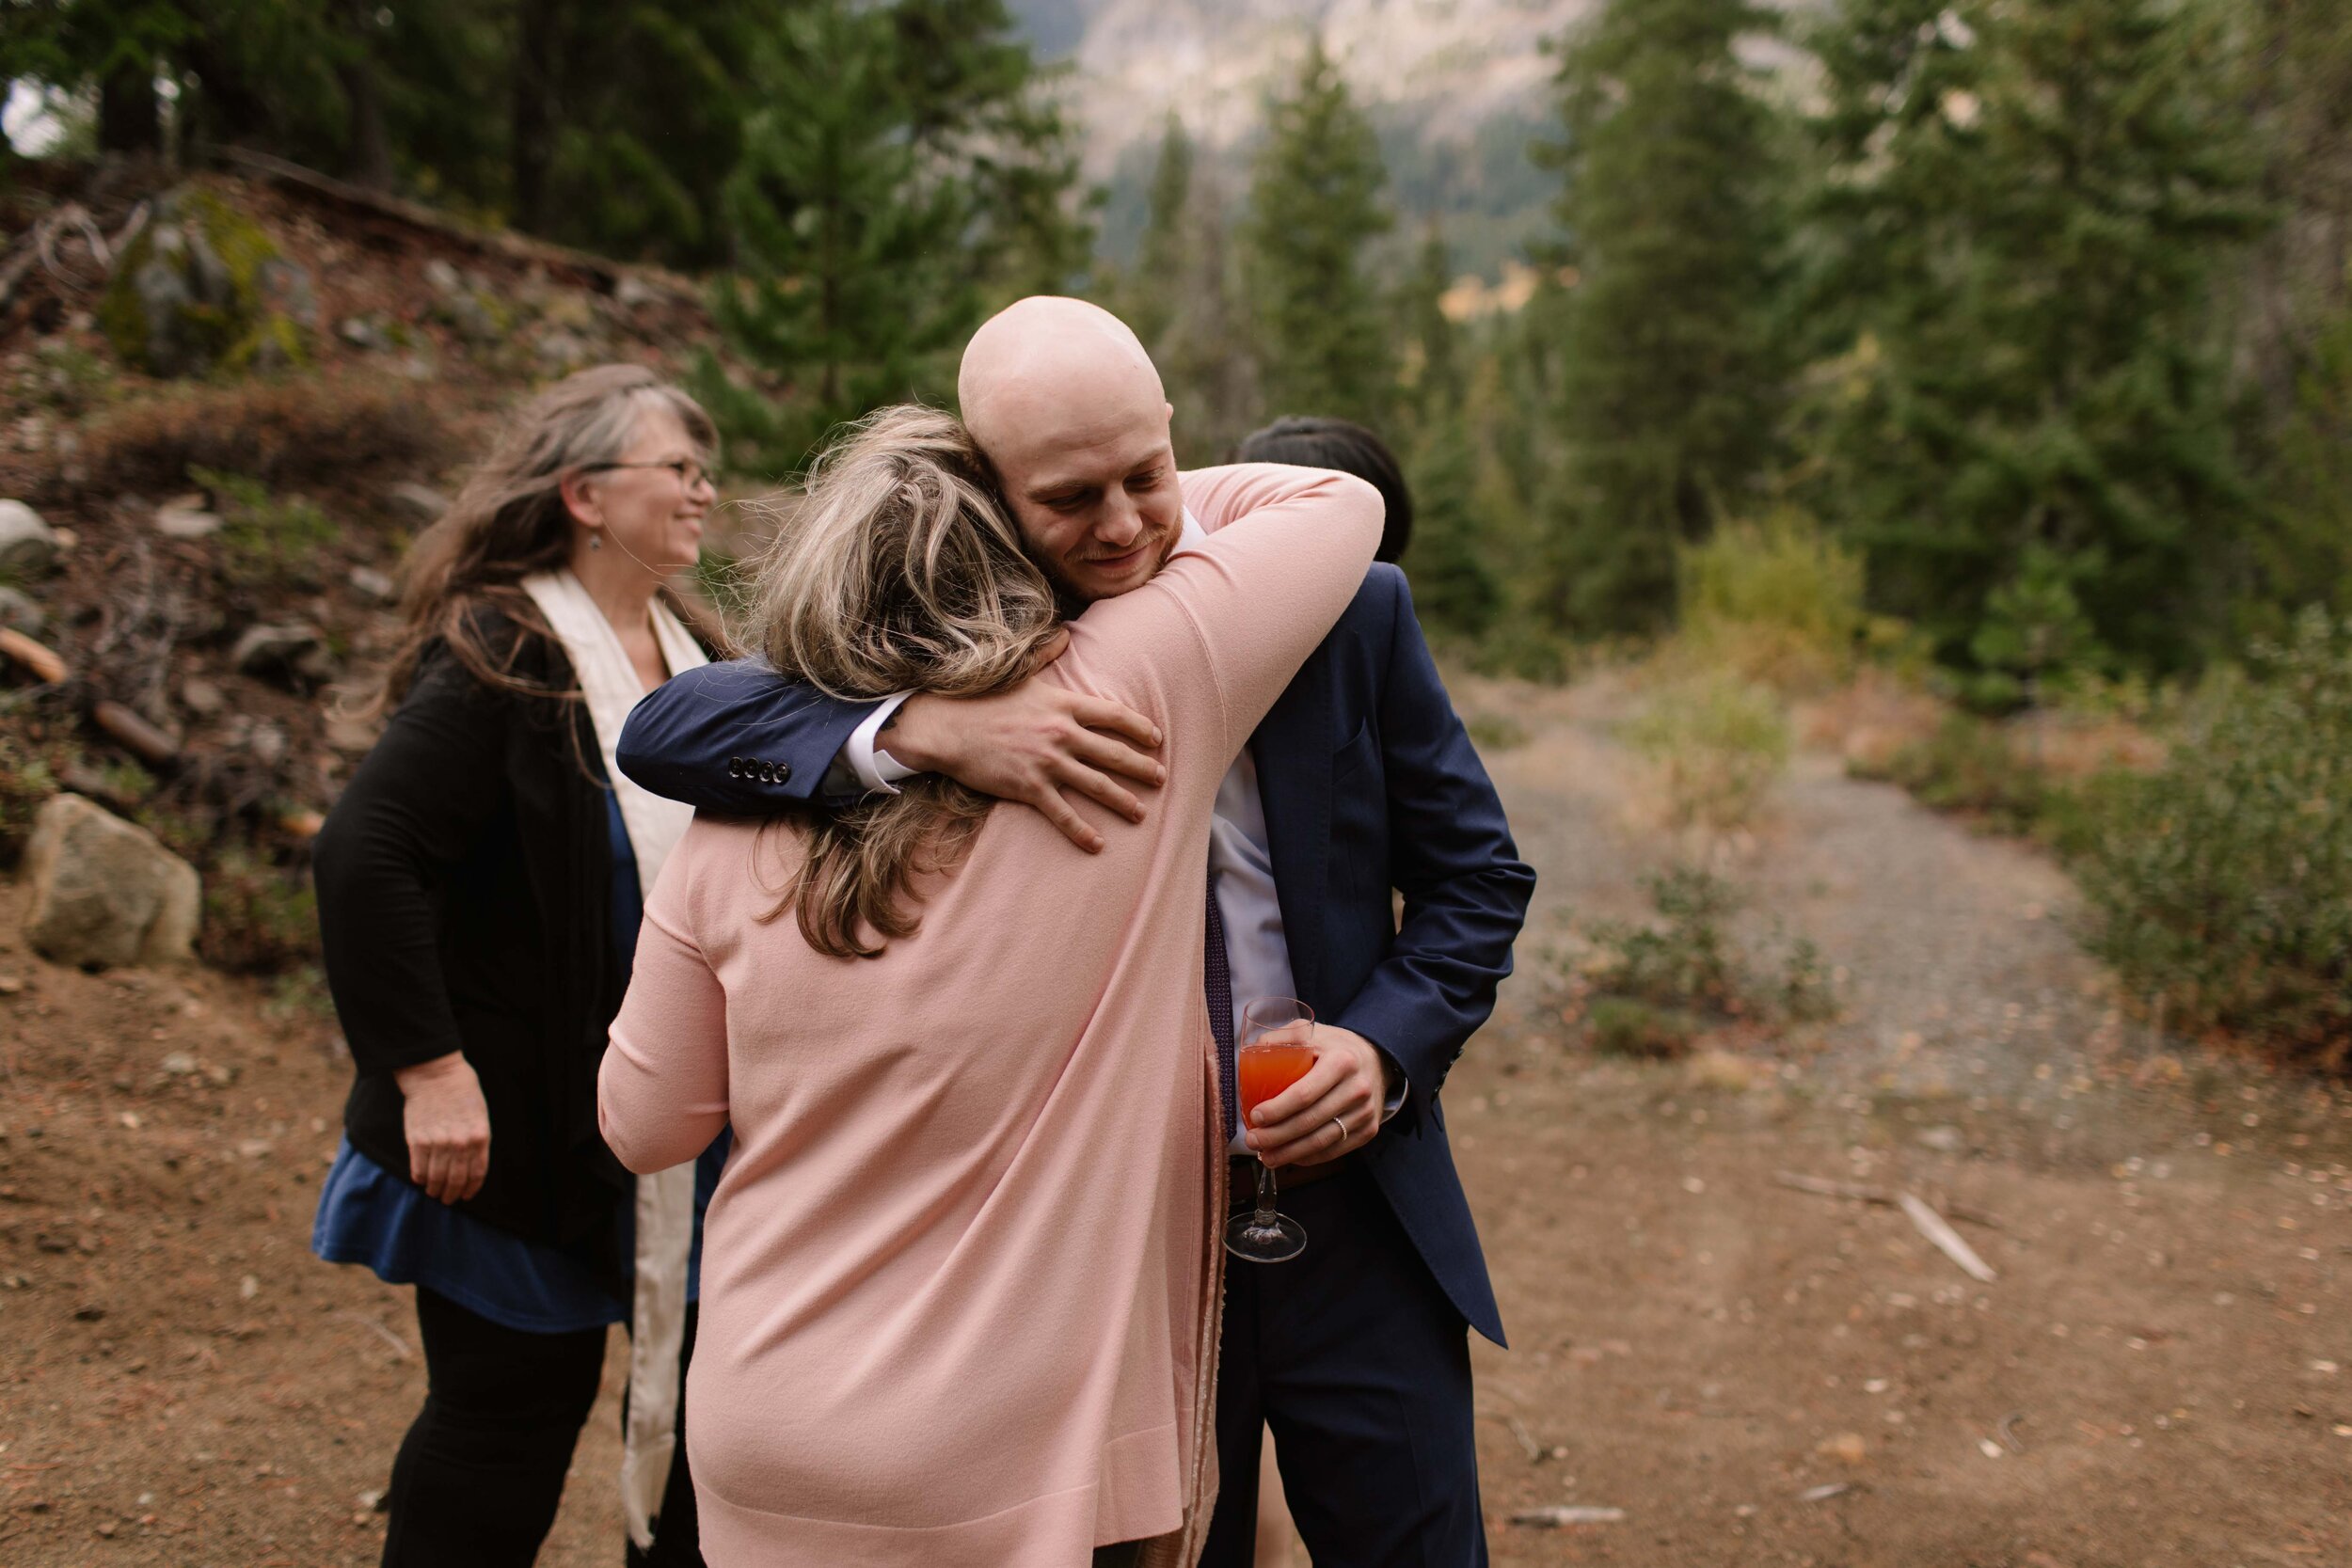 socal-san-diego-southern-california-elopement-small-wedding-outdoor-forest-mountains-waterfall-ceremony-leavenworth-washington-photographer-26.jpg